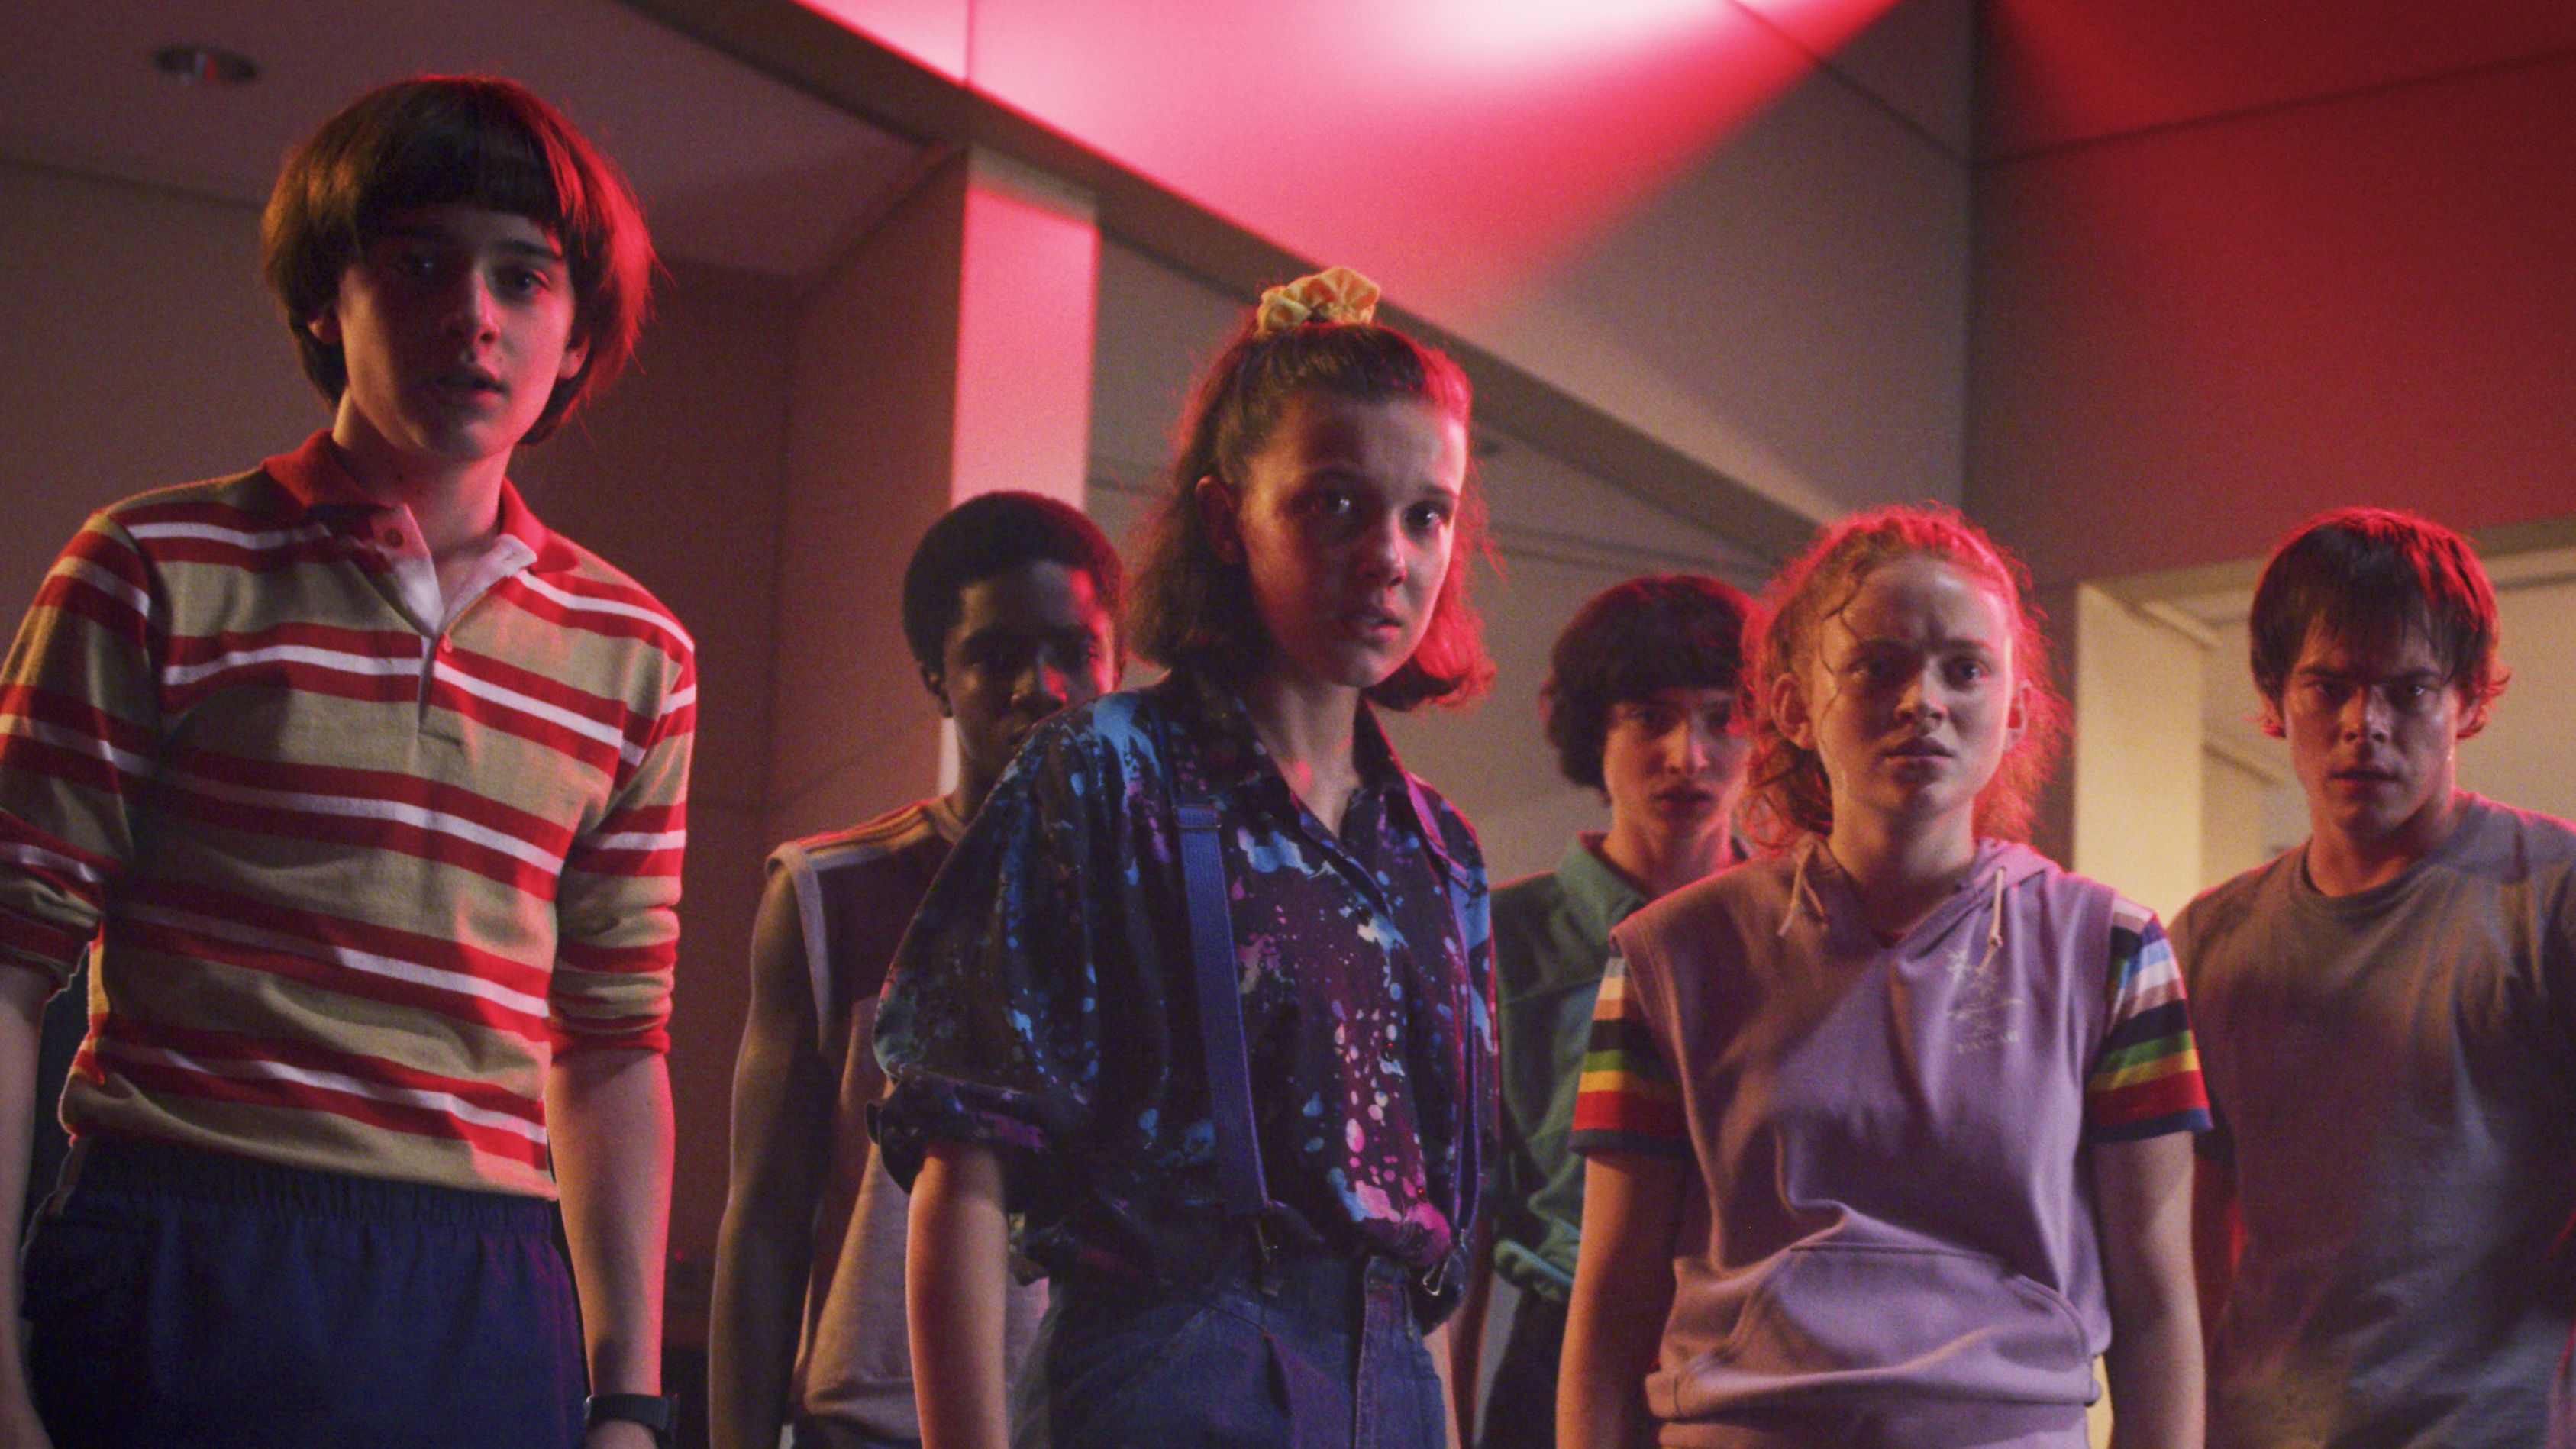 Stranger Things Season 2 Promises Justice for Barb